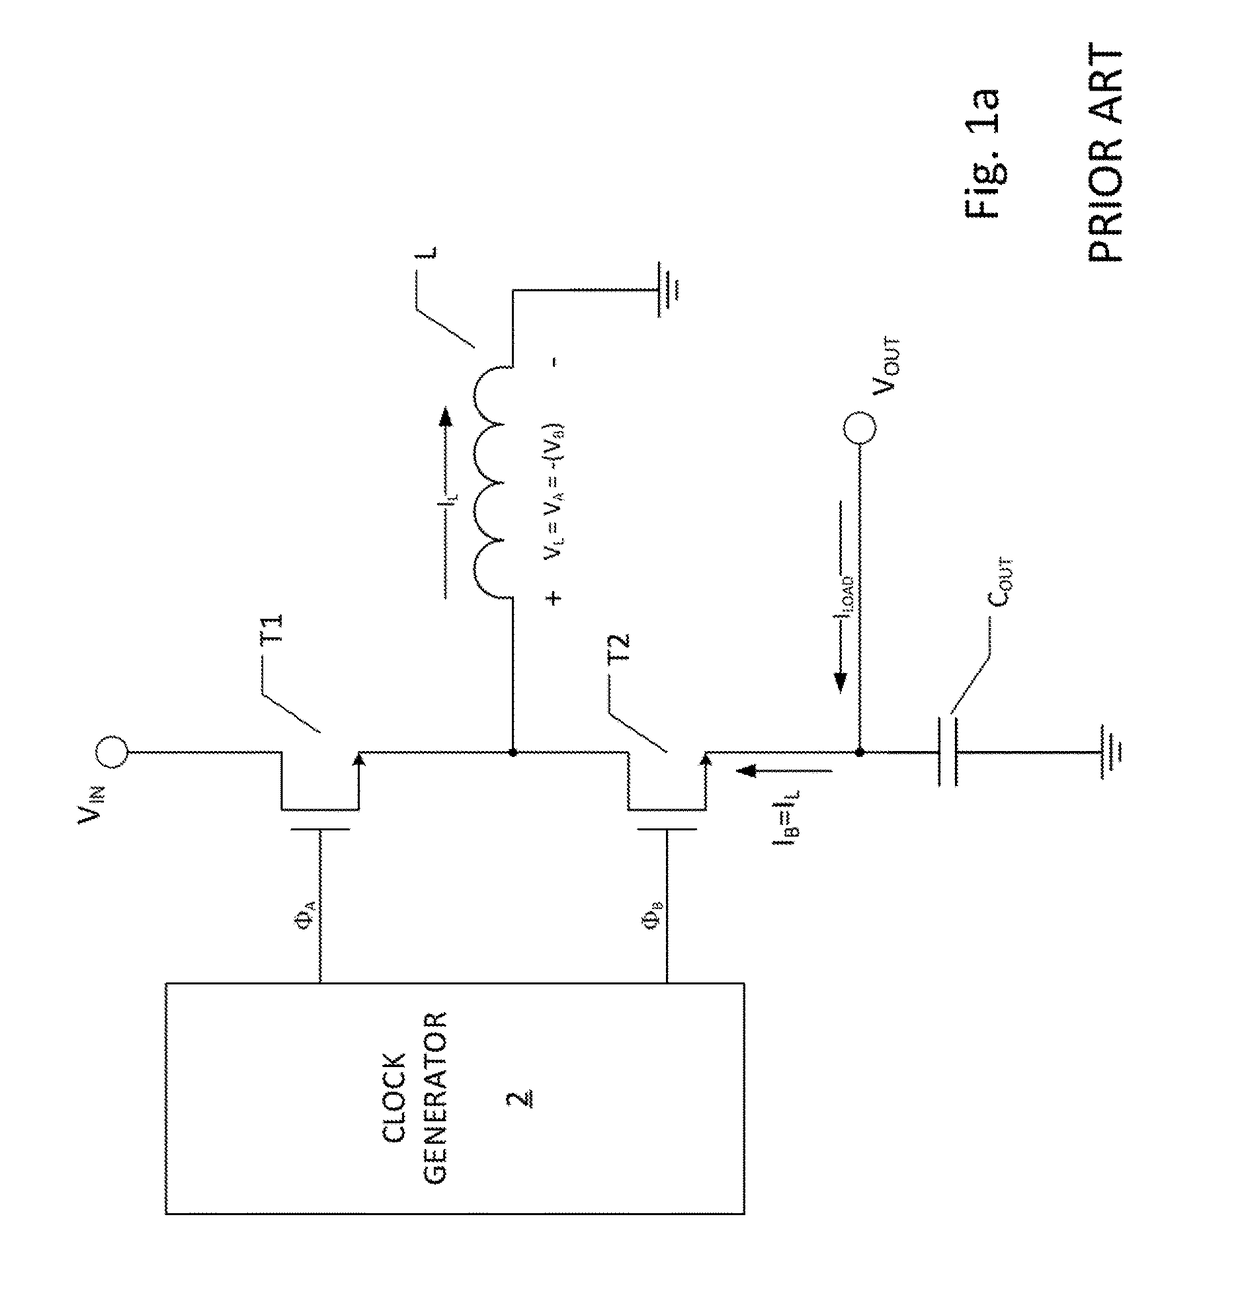 Hybrid capacitive-inductive voltage converter